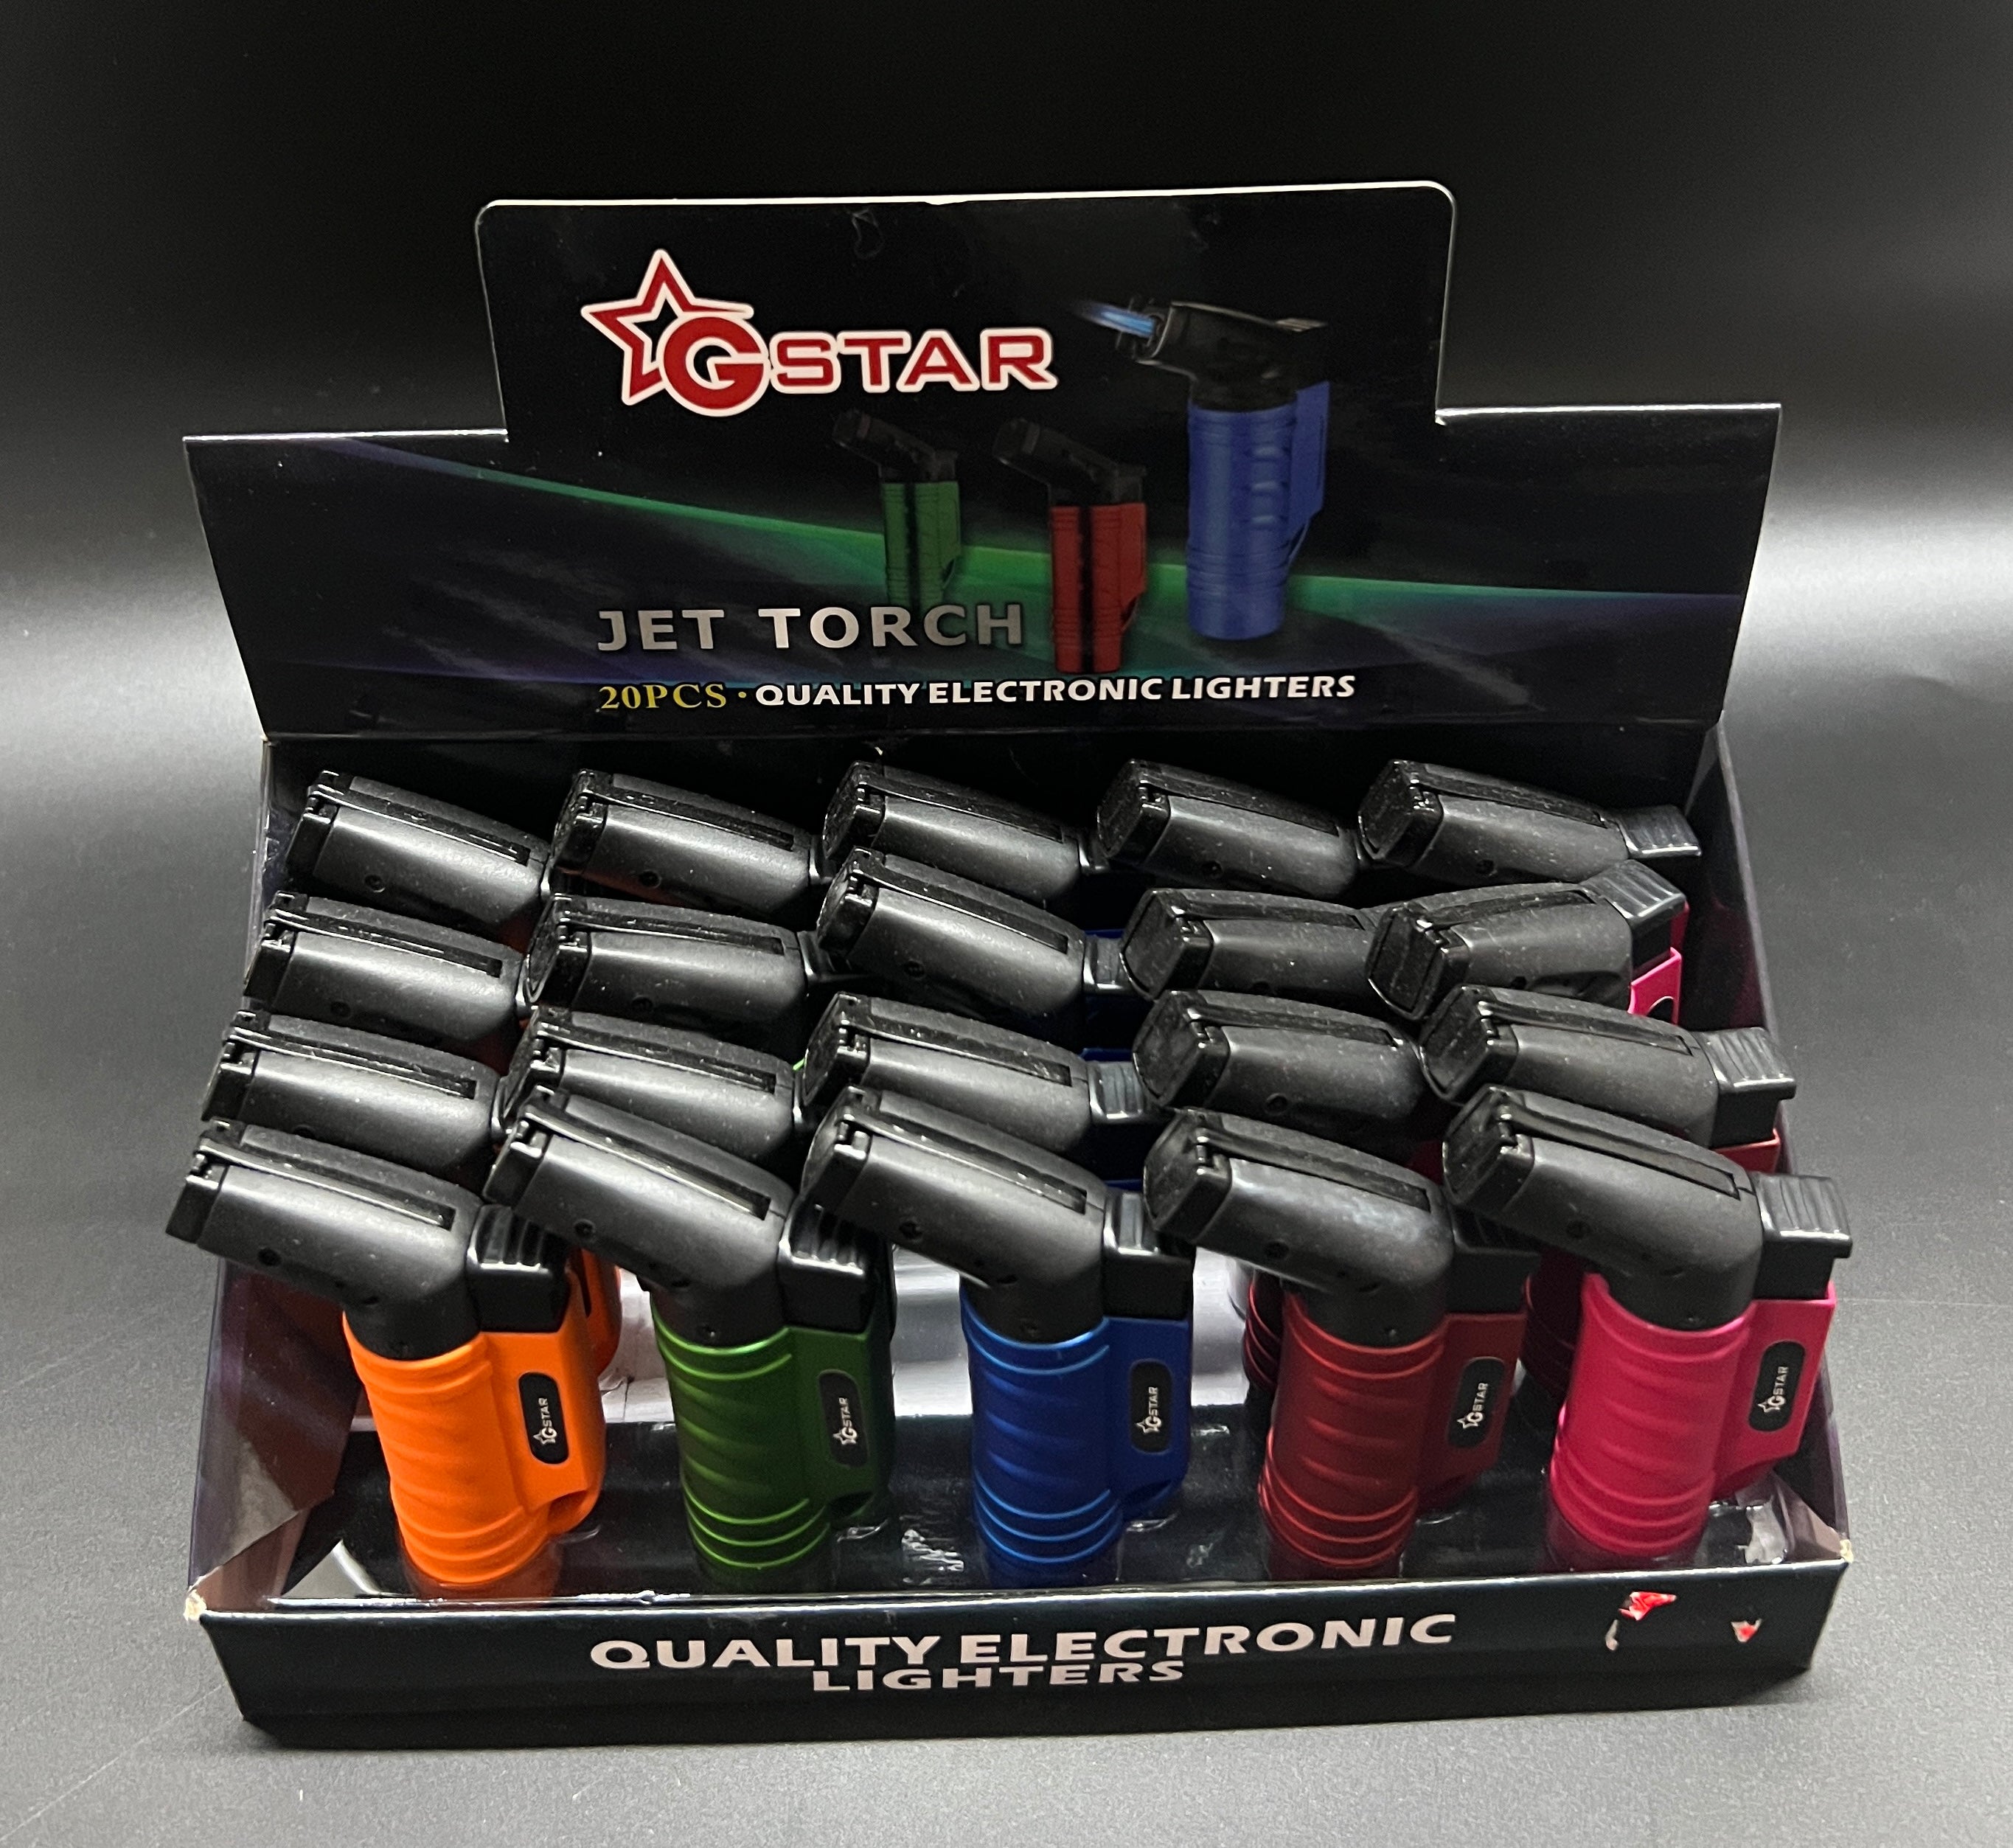 Jet Torch Quality Electronic Lighters